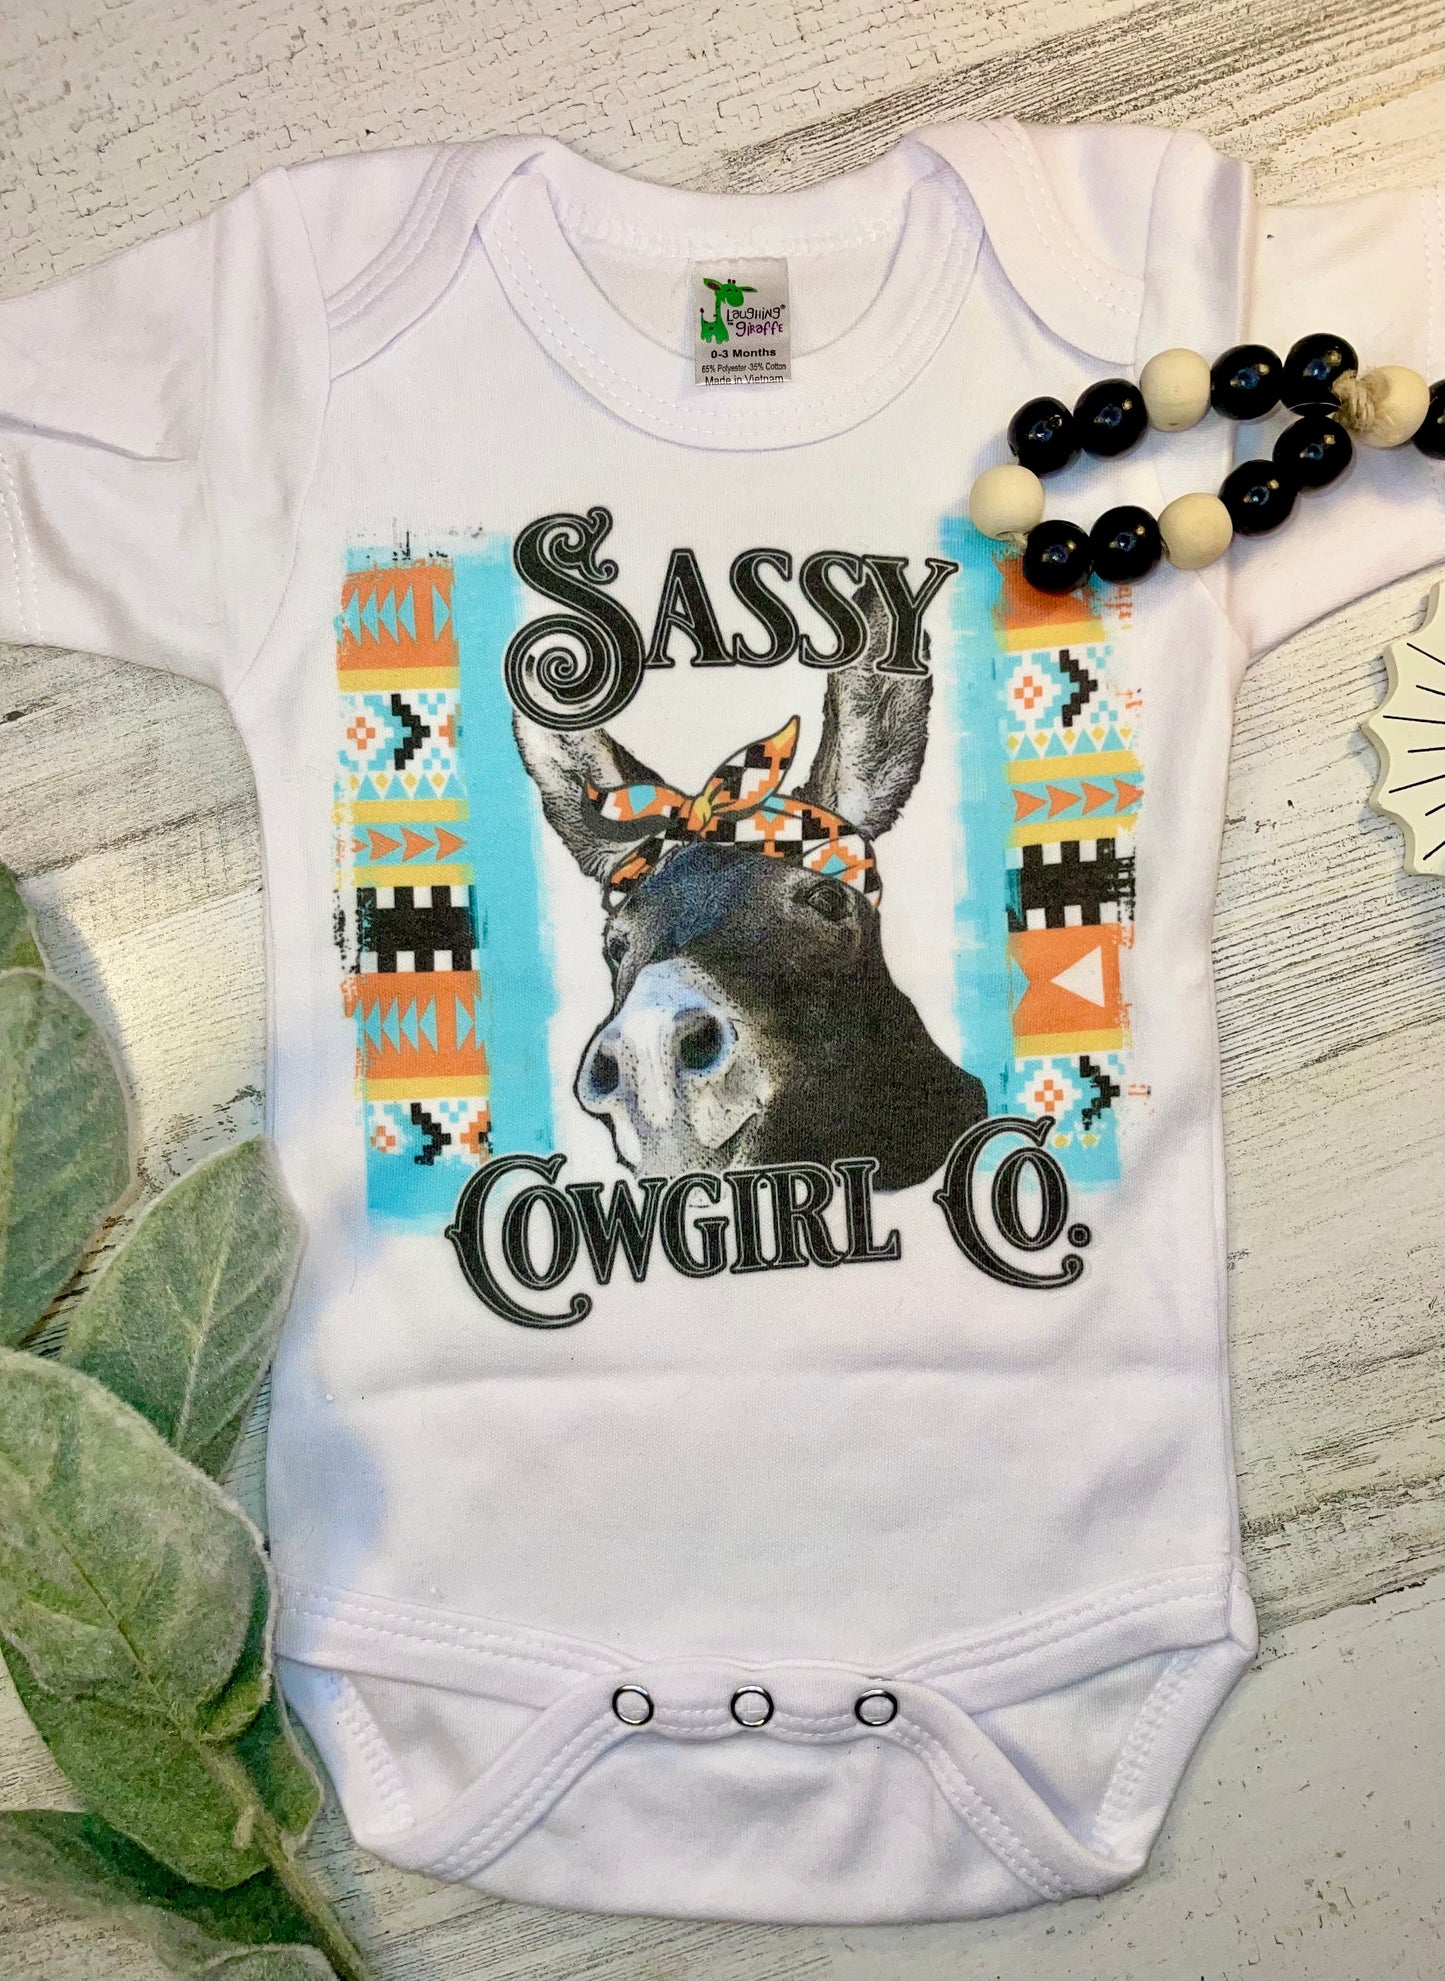 Product details  Custom sublimated  onesie that reads "Sassy Cowgirl Co." Pressed on a Laughing Giraffe Short sleeve  Fits true to size Contact us about a custom color shirt.   *Colors may vary slightly due to monitor resolution and lighting* Southern Bliss Boutique